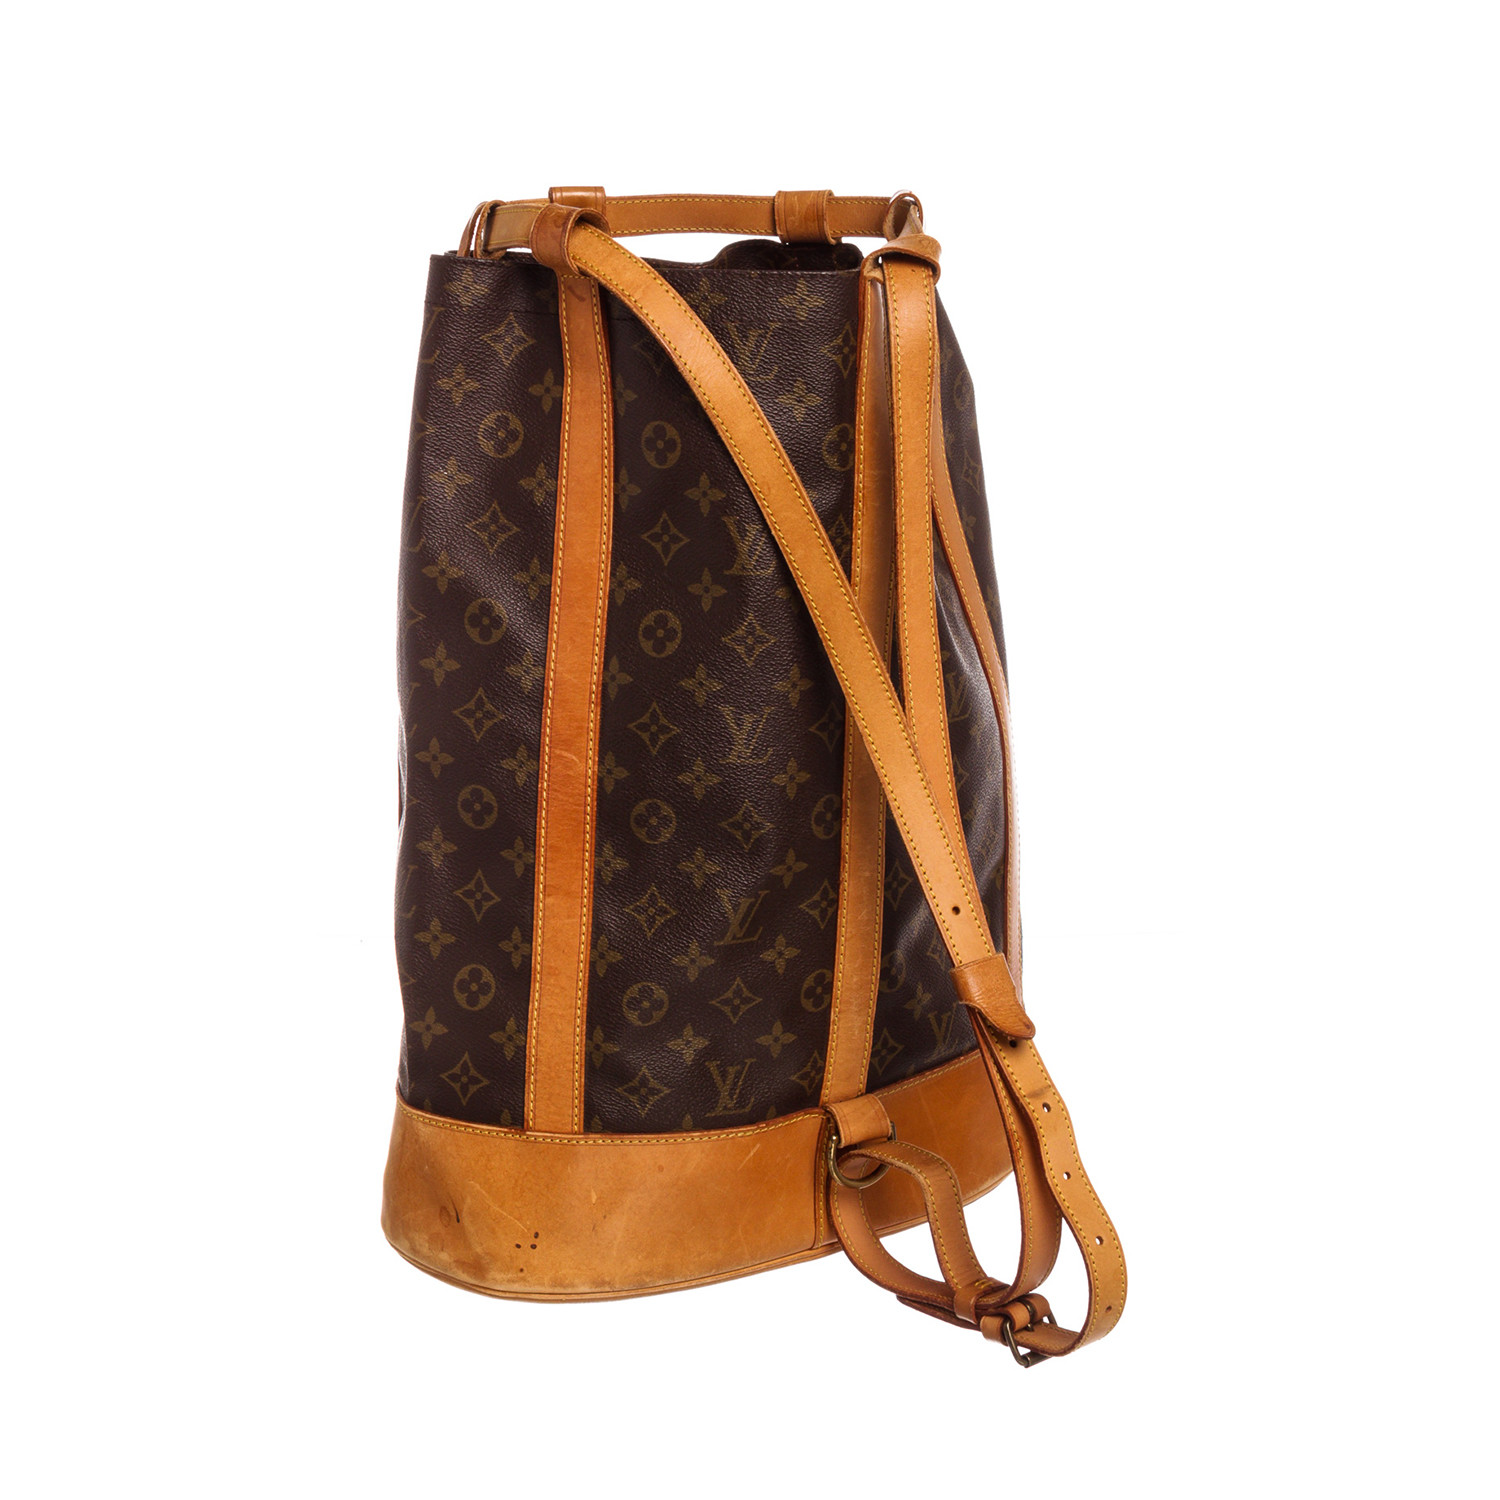 Louis Vuitton // Monogram Canvas Leather Randonne Backpack // 8910A2 // Pre-Owned - Pre-Owned ...